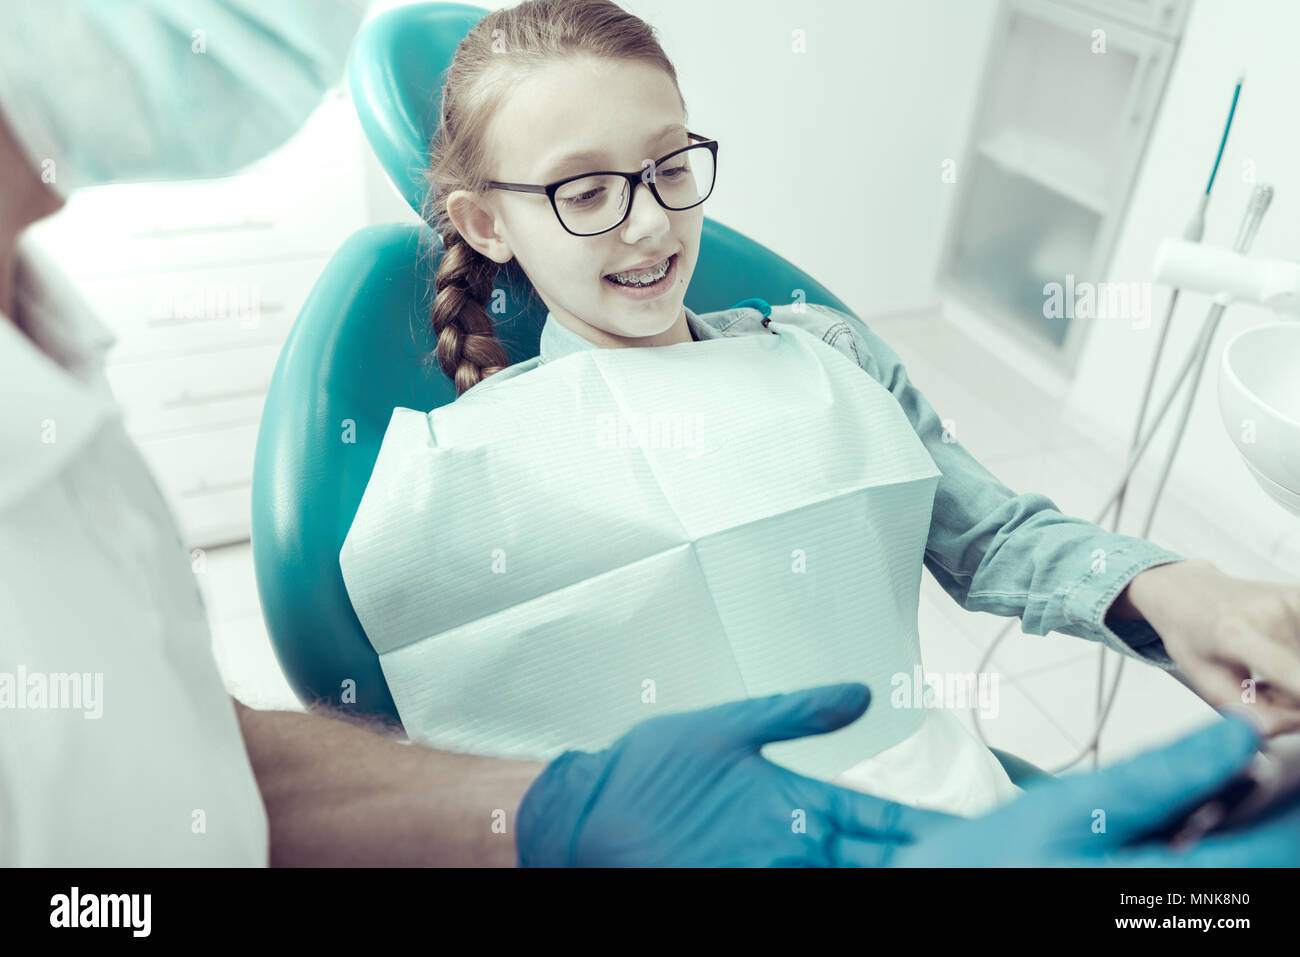 Curious girl with braces on her teeth sitting in a dental chair Stock Photo